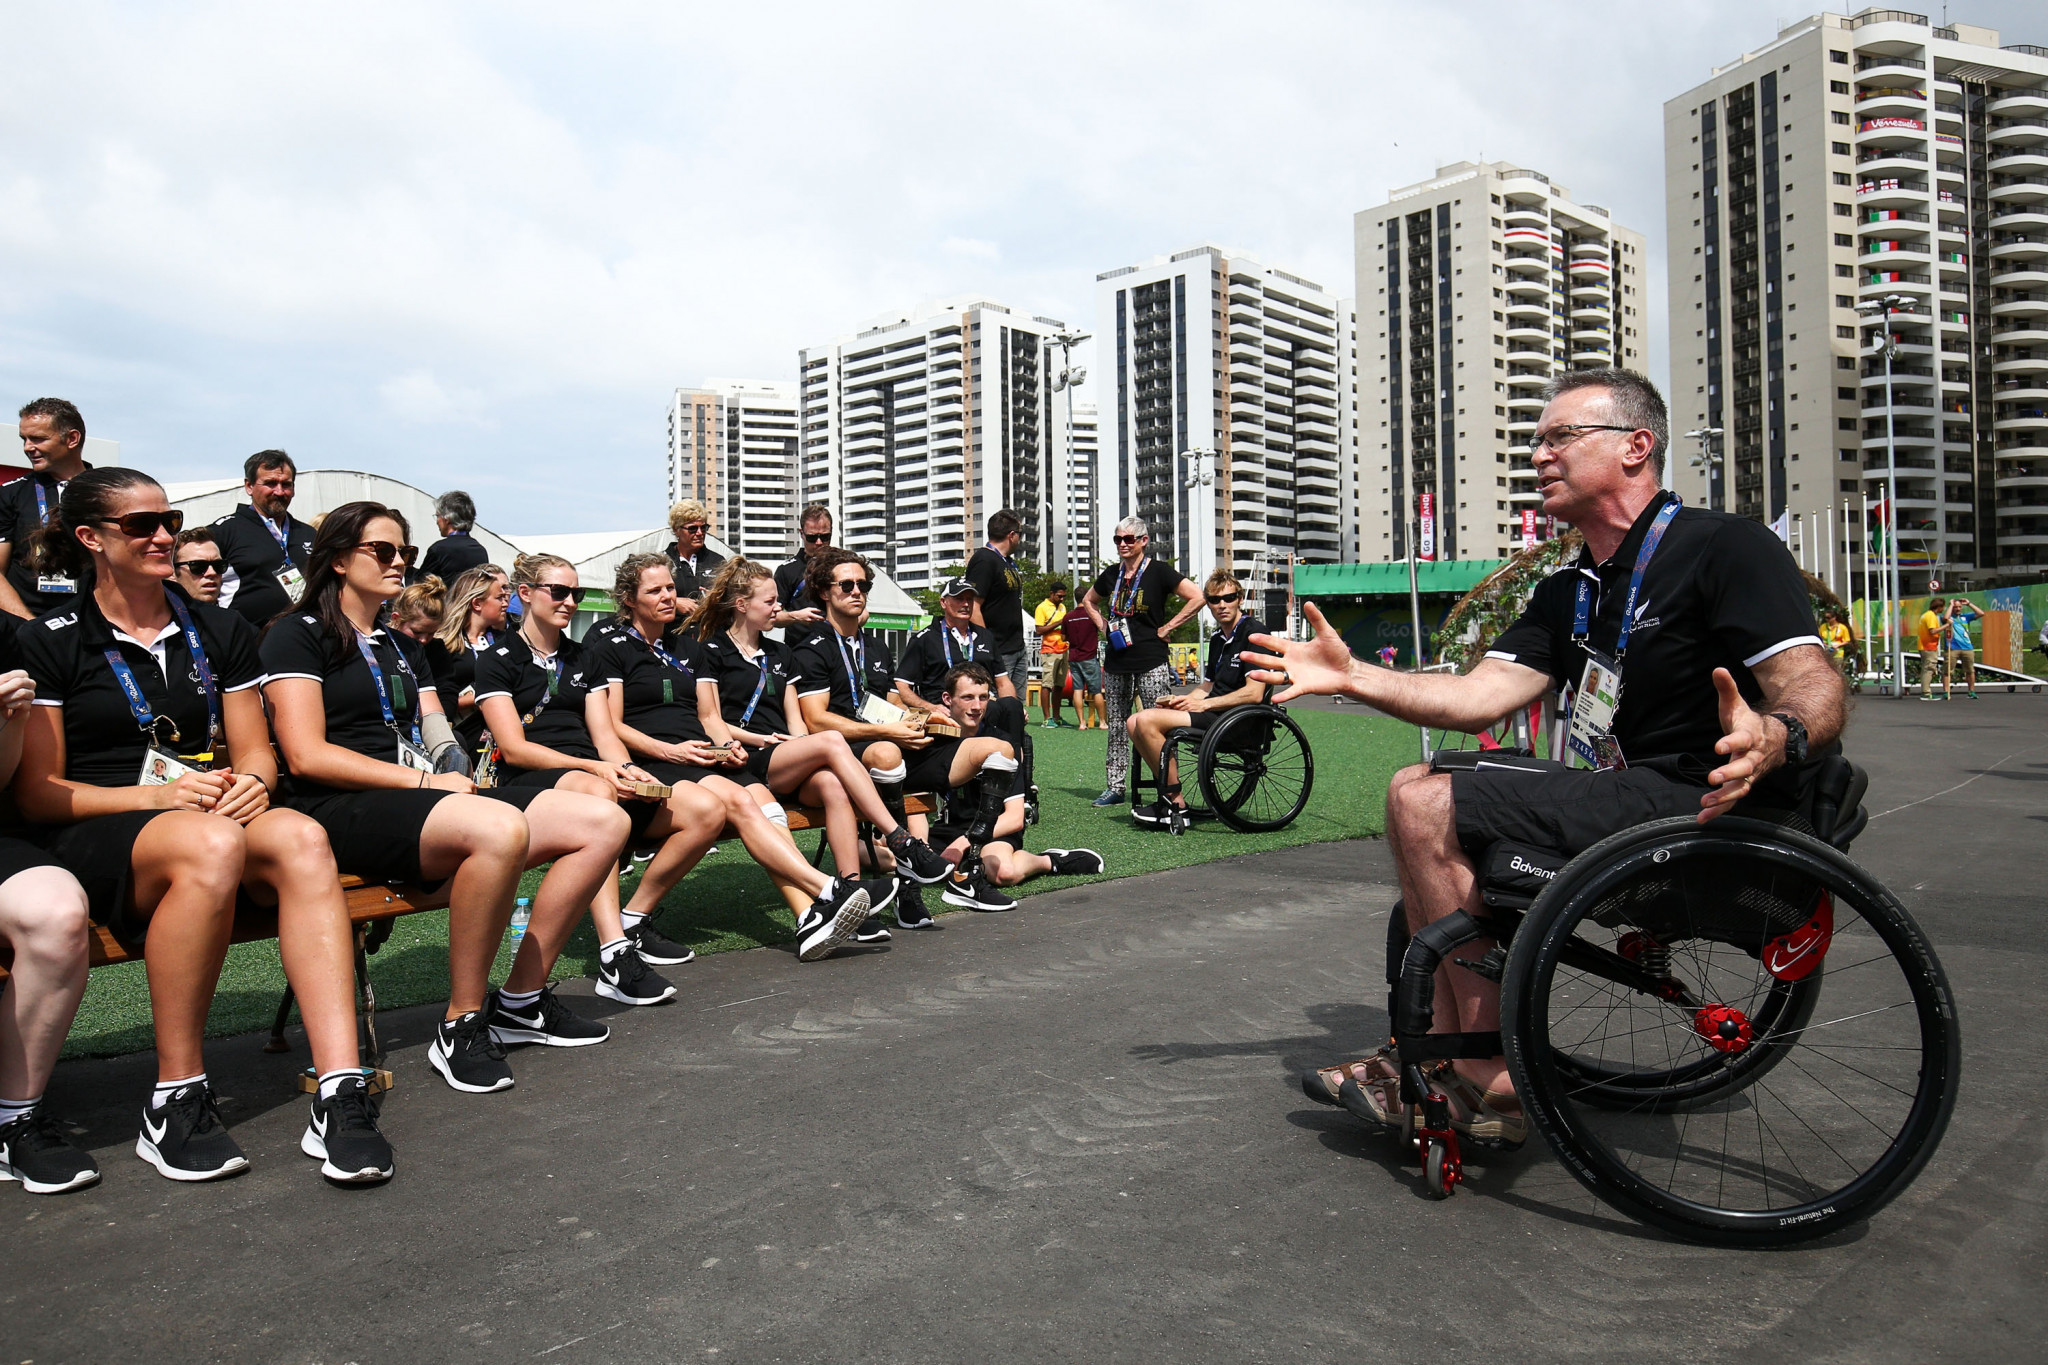 Ben Lucas was New Zealand's Chef de Mission at the 2016 Paralympic Games in Rio de Janeiro ©Getty Images